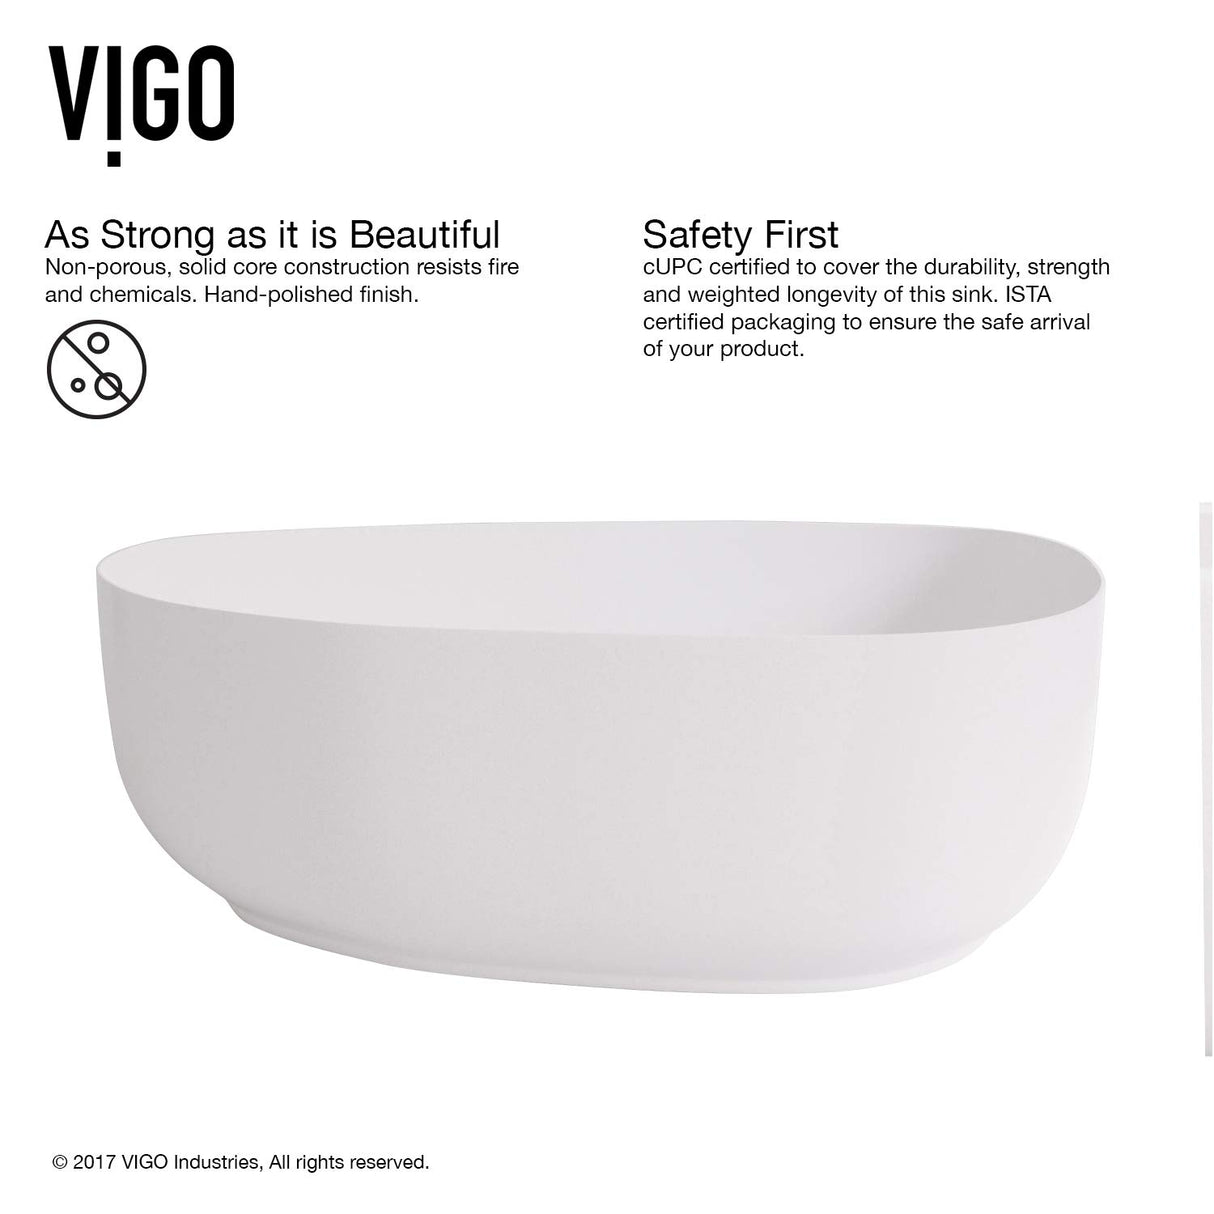 VIGO VGT1251 15.25" L -20.0" W -12.38" H Handmade Countertop Matte Stone Novelty/Specialty Vessel Bathroom Sink Set in Matte White Finish with Antique Rubbed Bronze Faucet and Pop Up Drain